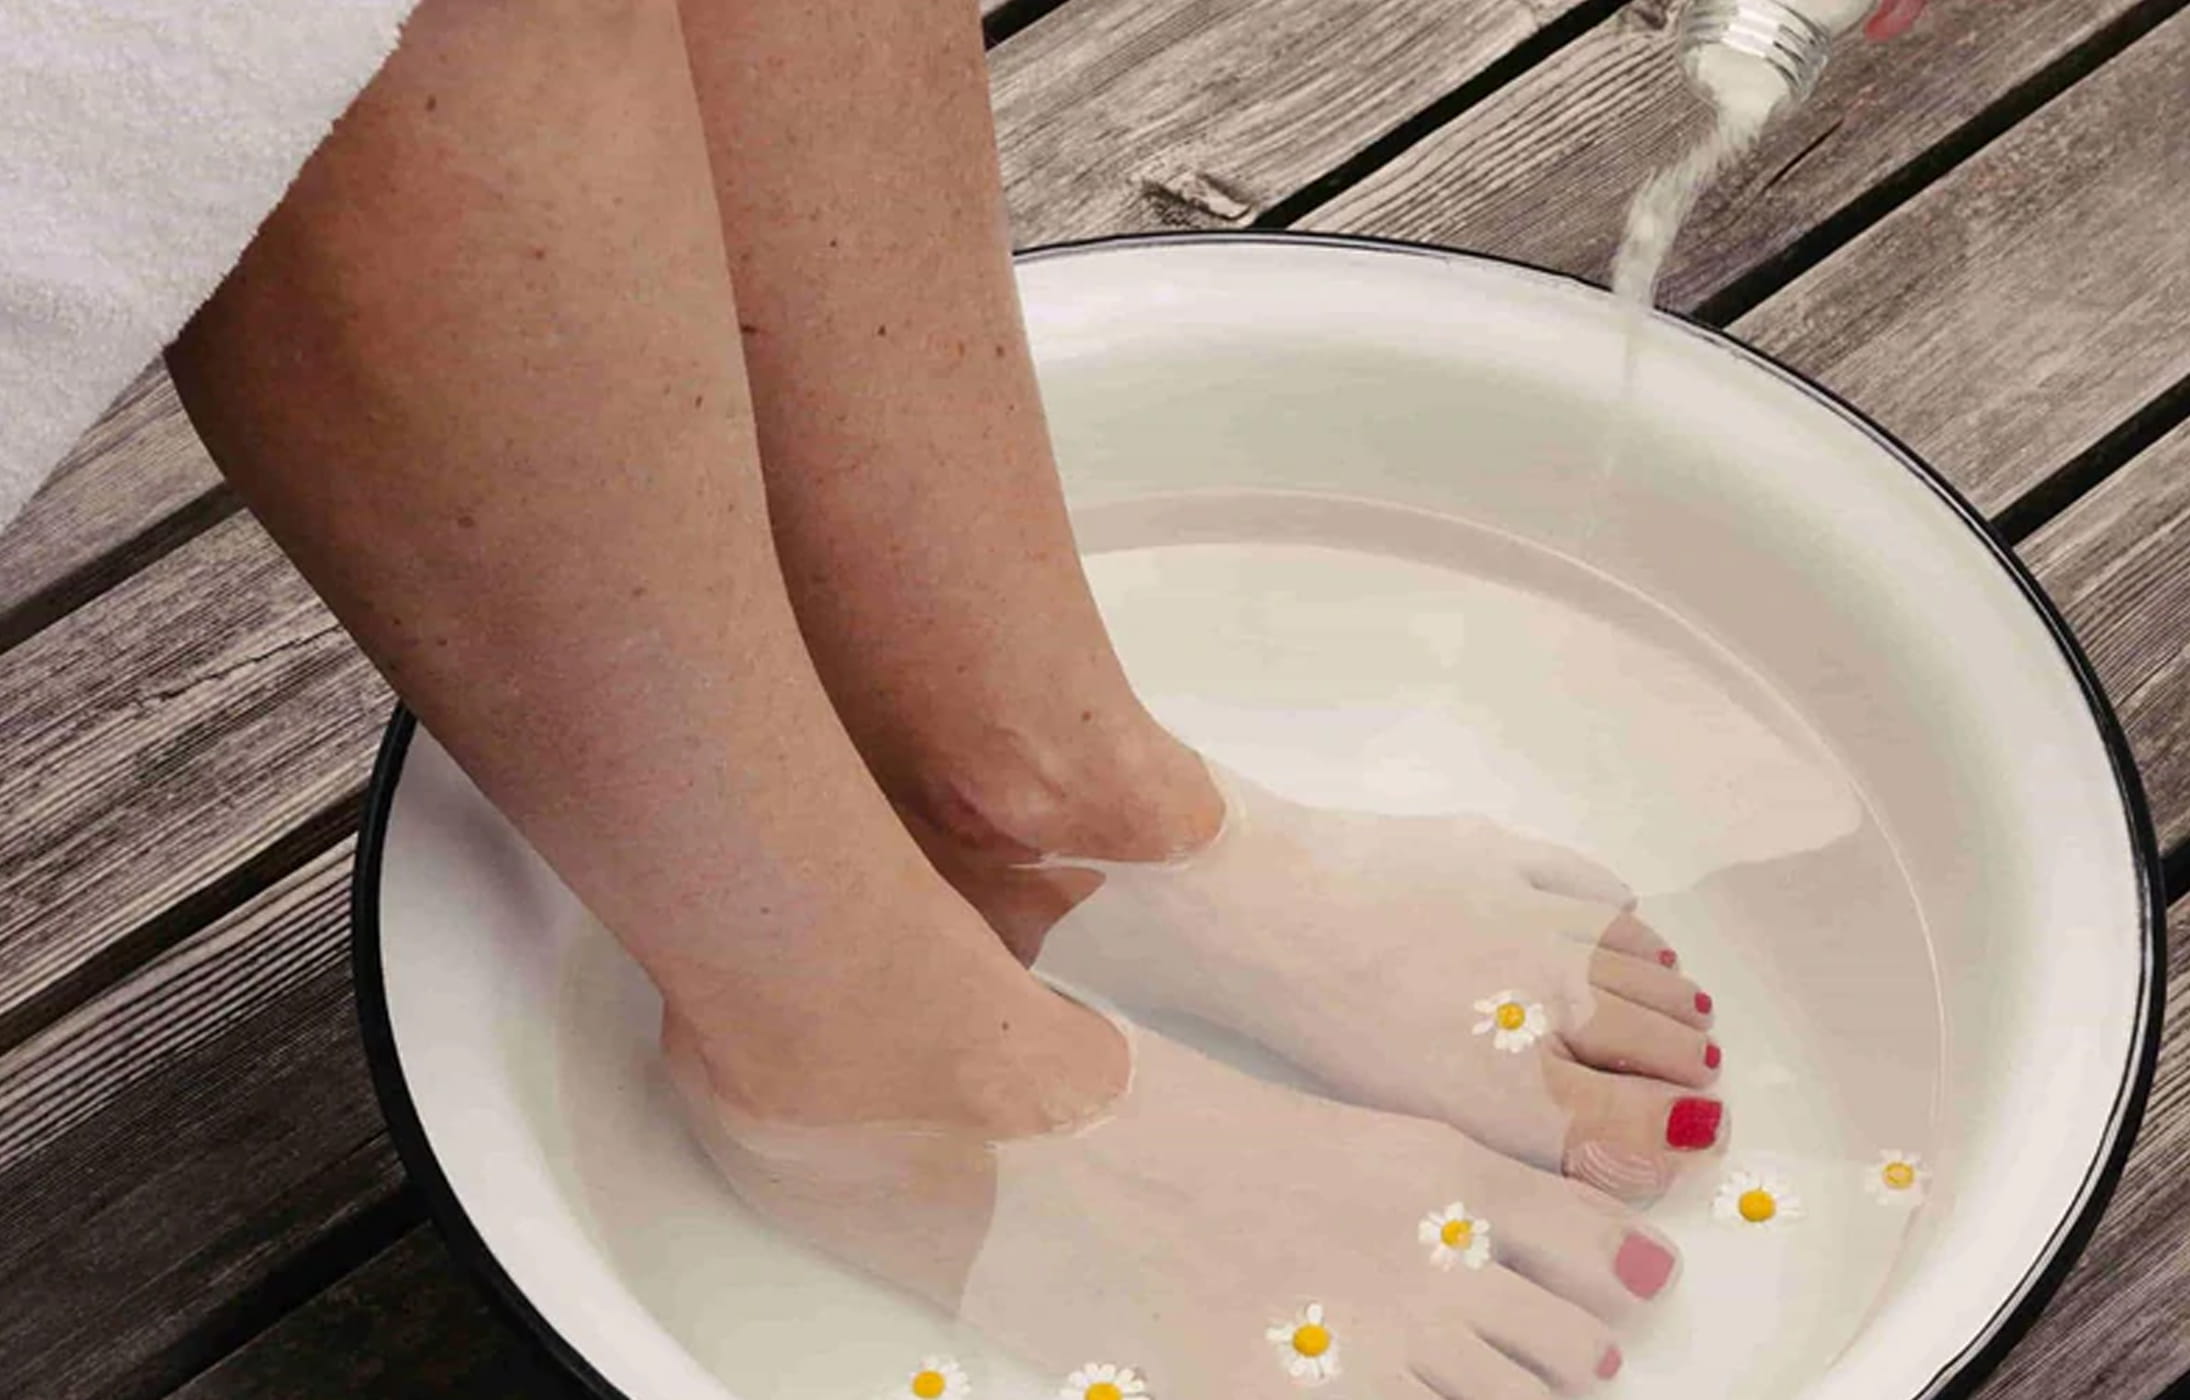 4 Reasons Pedicures Are Actually Good for Your Health - Faces Spa